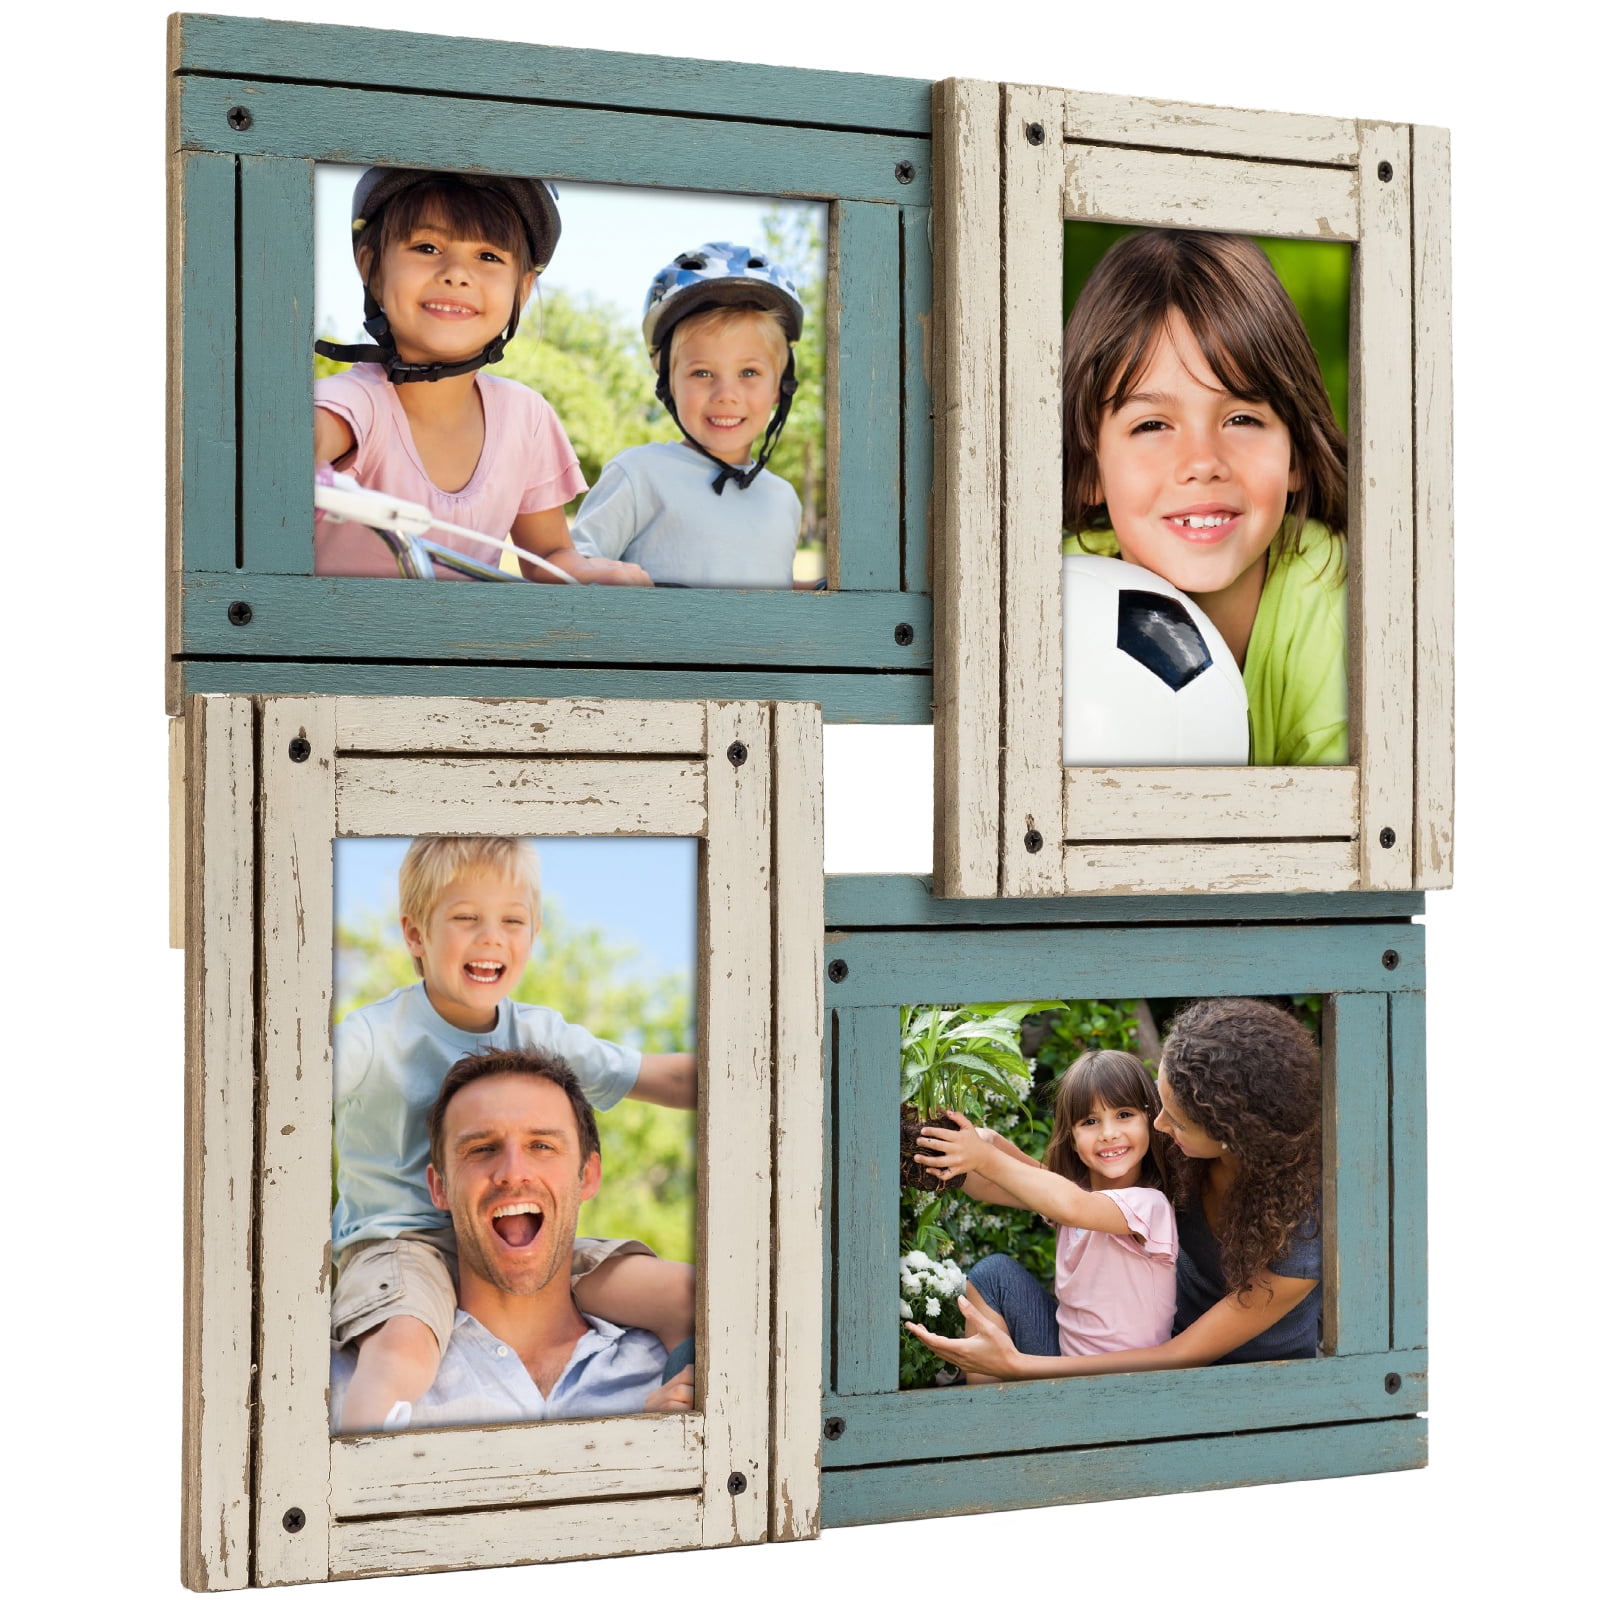 Display Multiple 4” x 6” Photos Family Photo Board Distressed Wood Frame Wall Decor Barnyard Designs Rustic Farmhouse Picture Frame Collage 15.75 x 13.75” White 